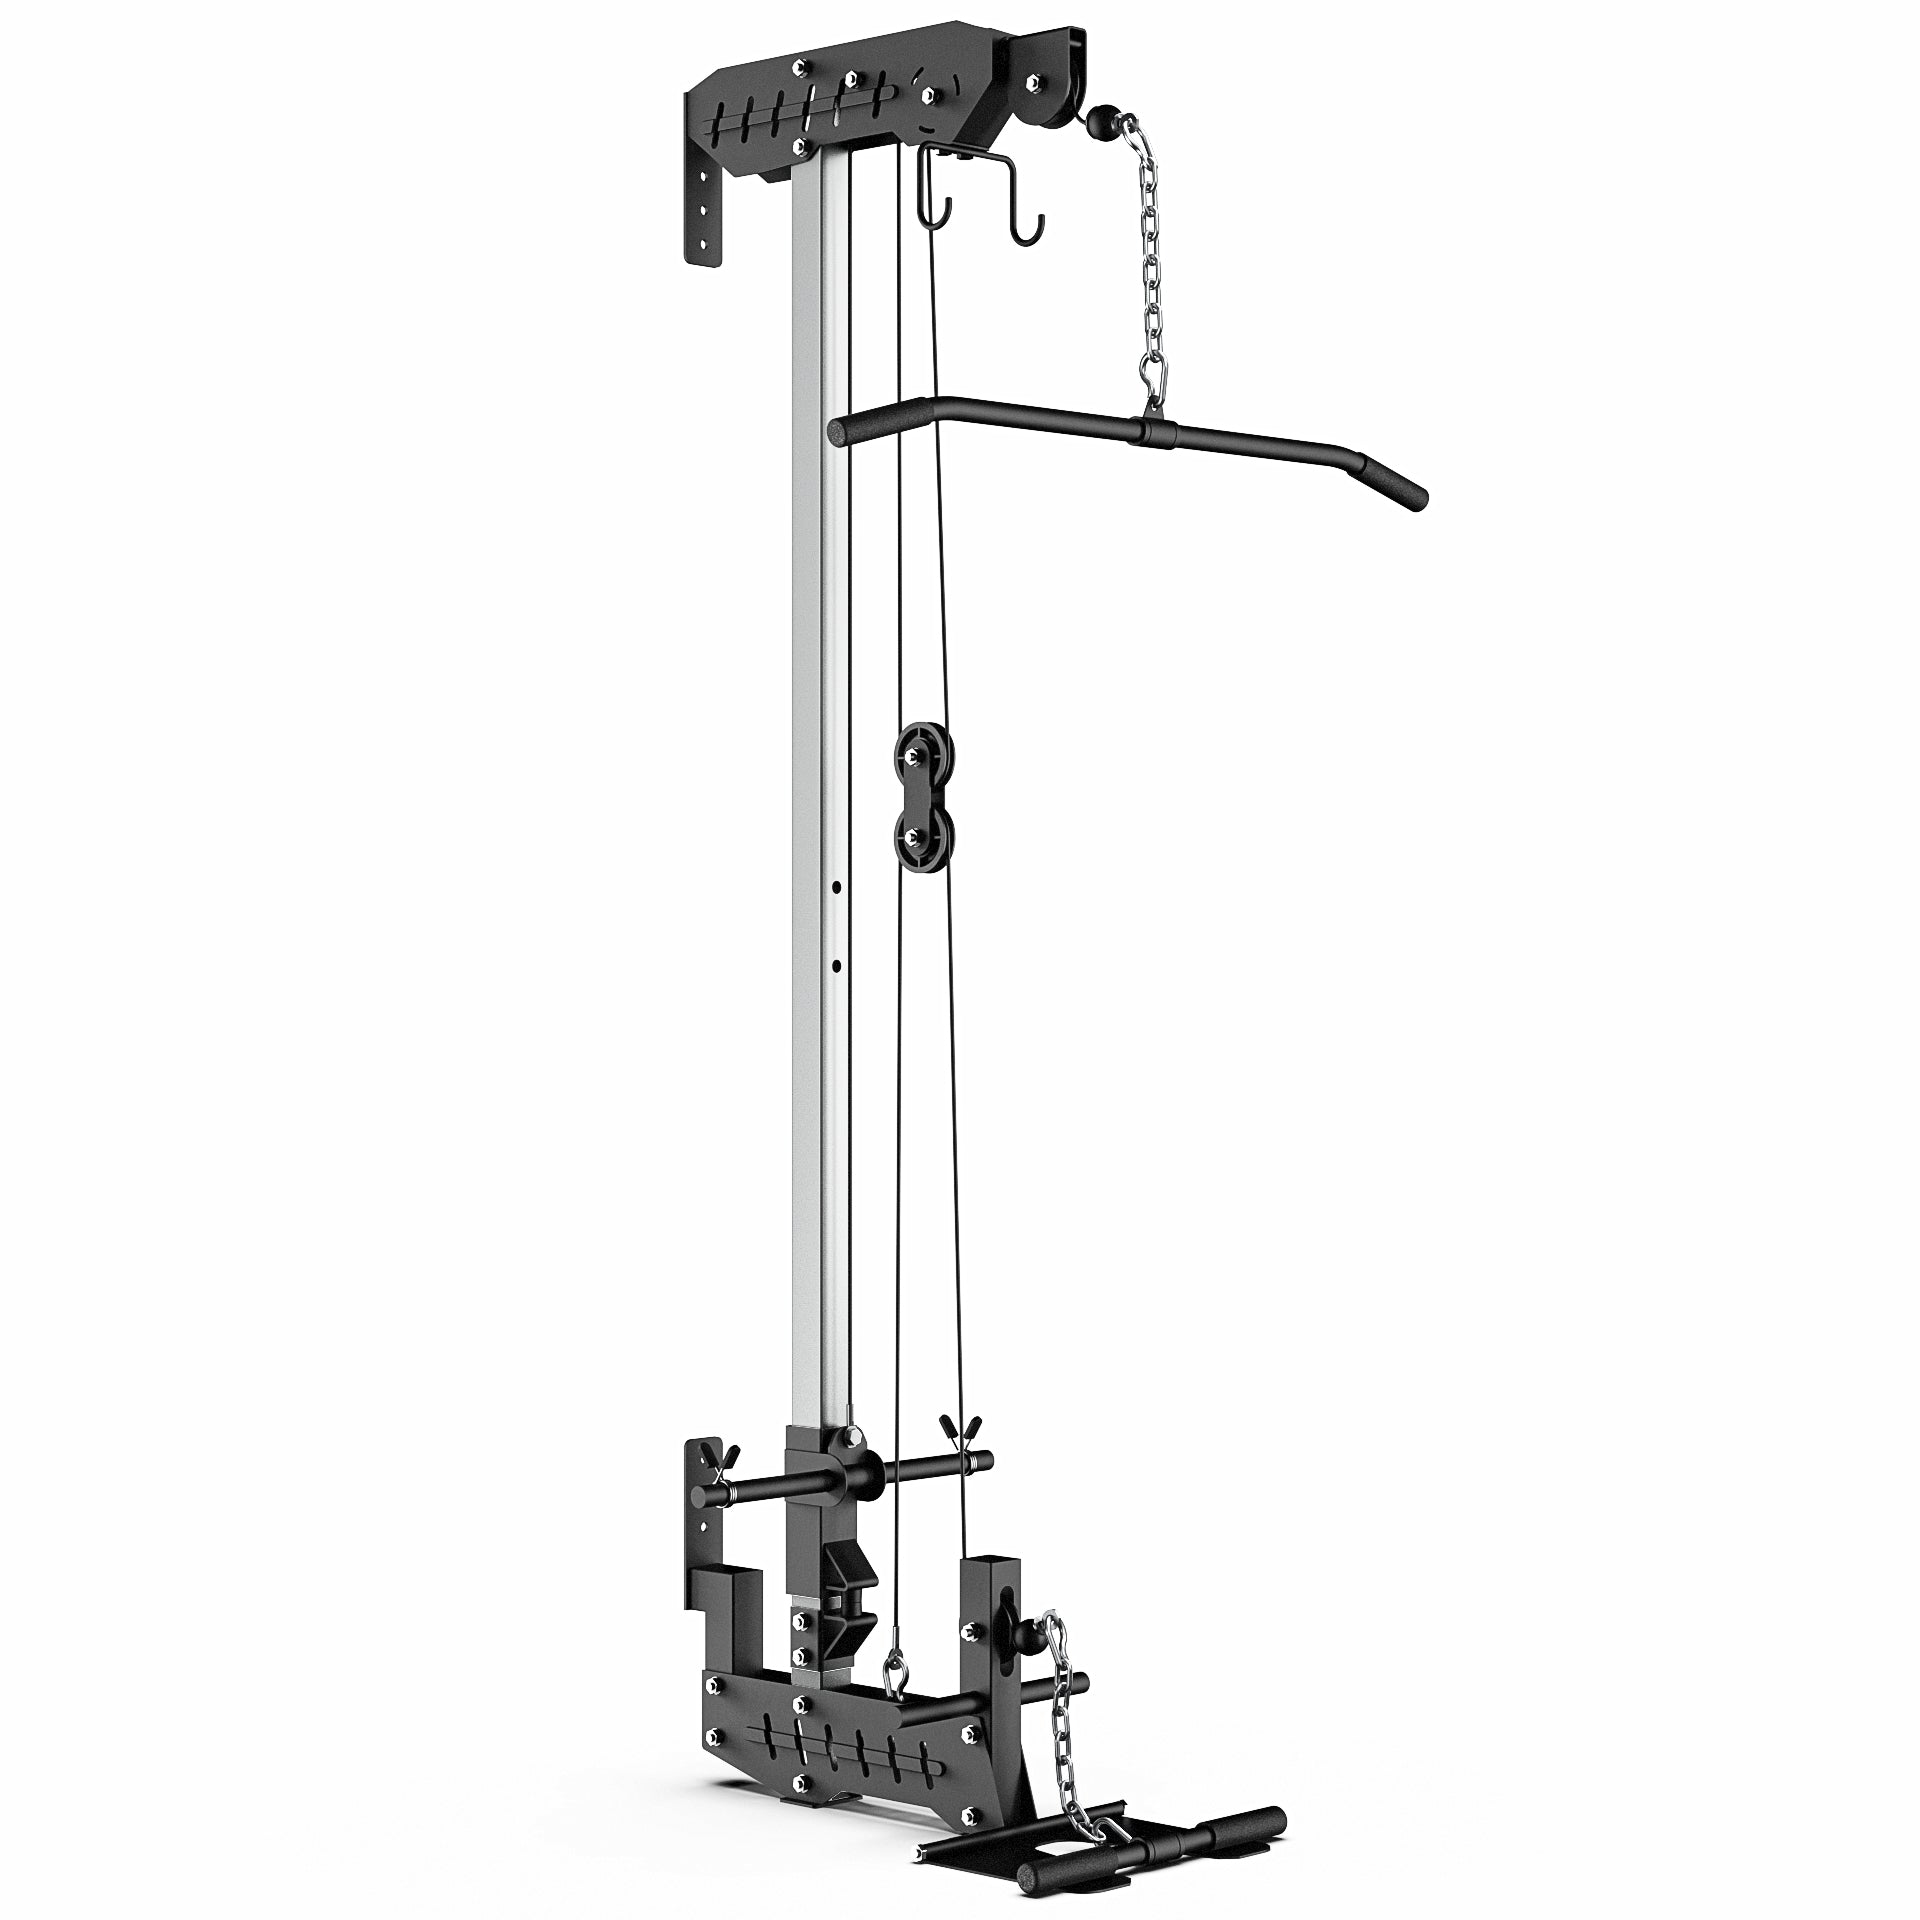 syedee Adjustable Seated Row Machine, Plate Loaded, Independent Converging  Arms-Multi Grip Positions with Rotating Handles, Back Workout Equipment Max